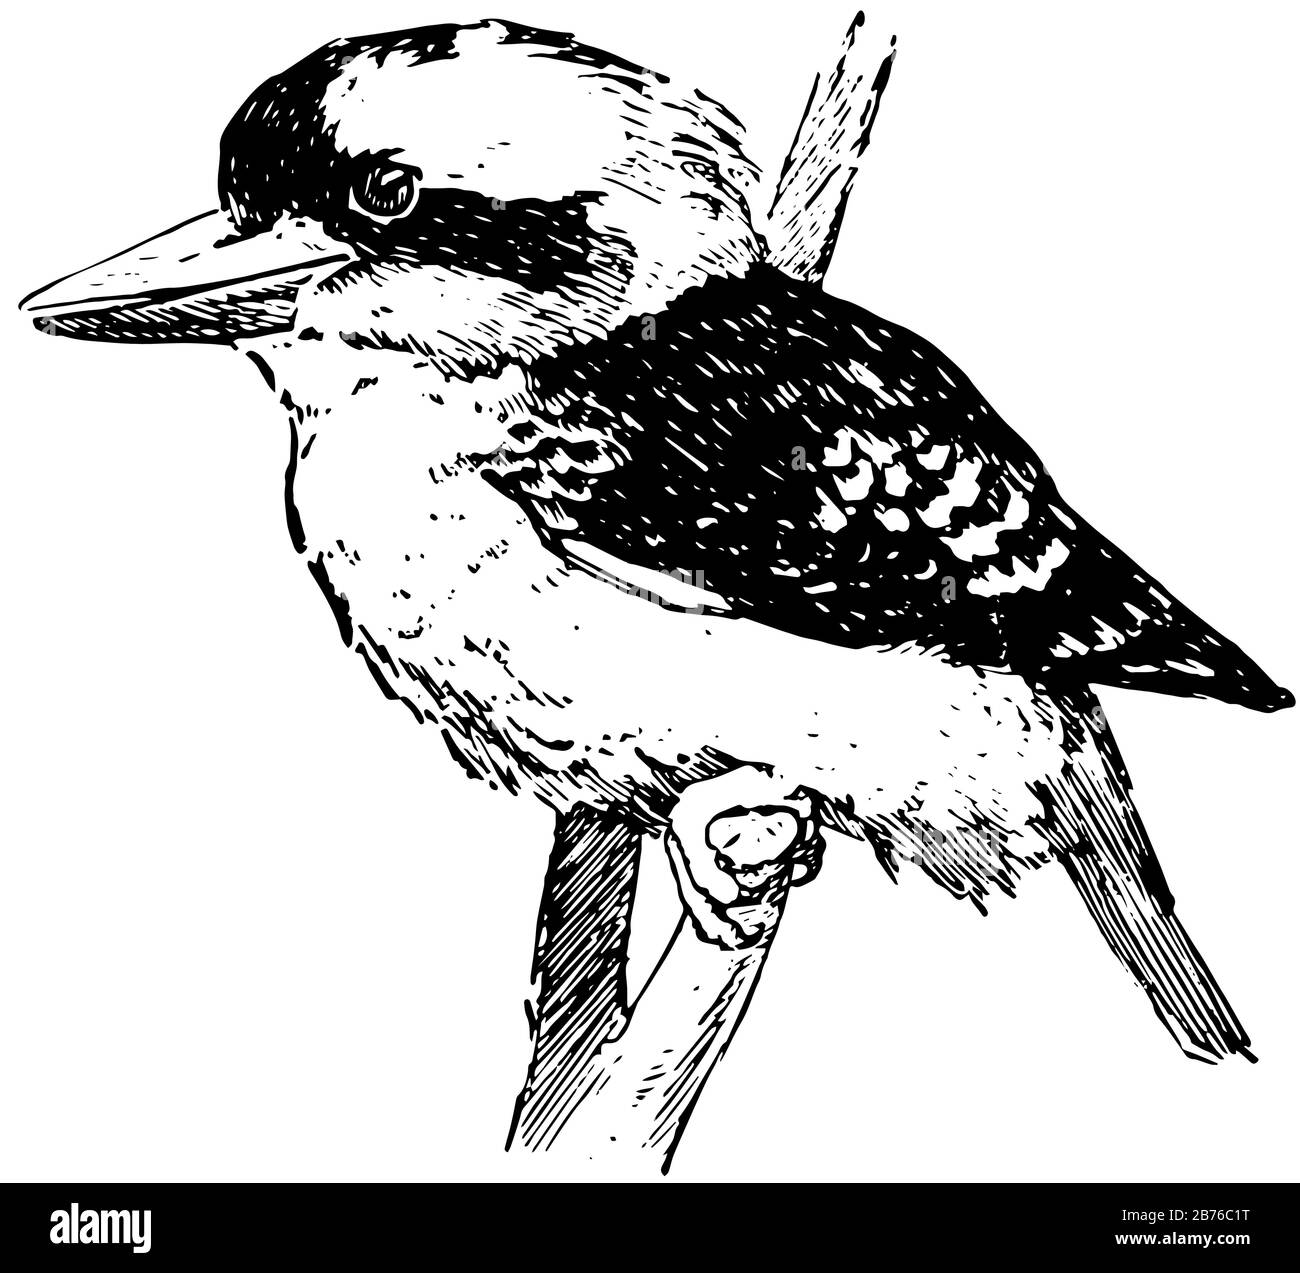 Kookaburra is terrestrial tree kingfishers of the genus Dacelo native to Australia and New Guinea, vintage line drawing or engraving illustration. Stock Vector